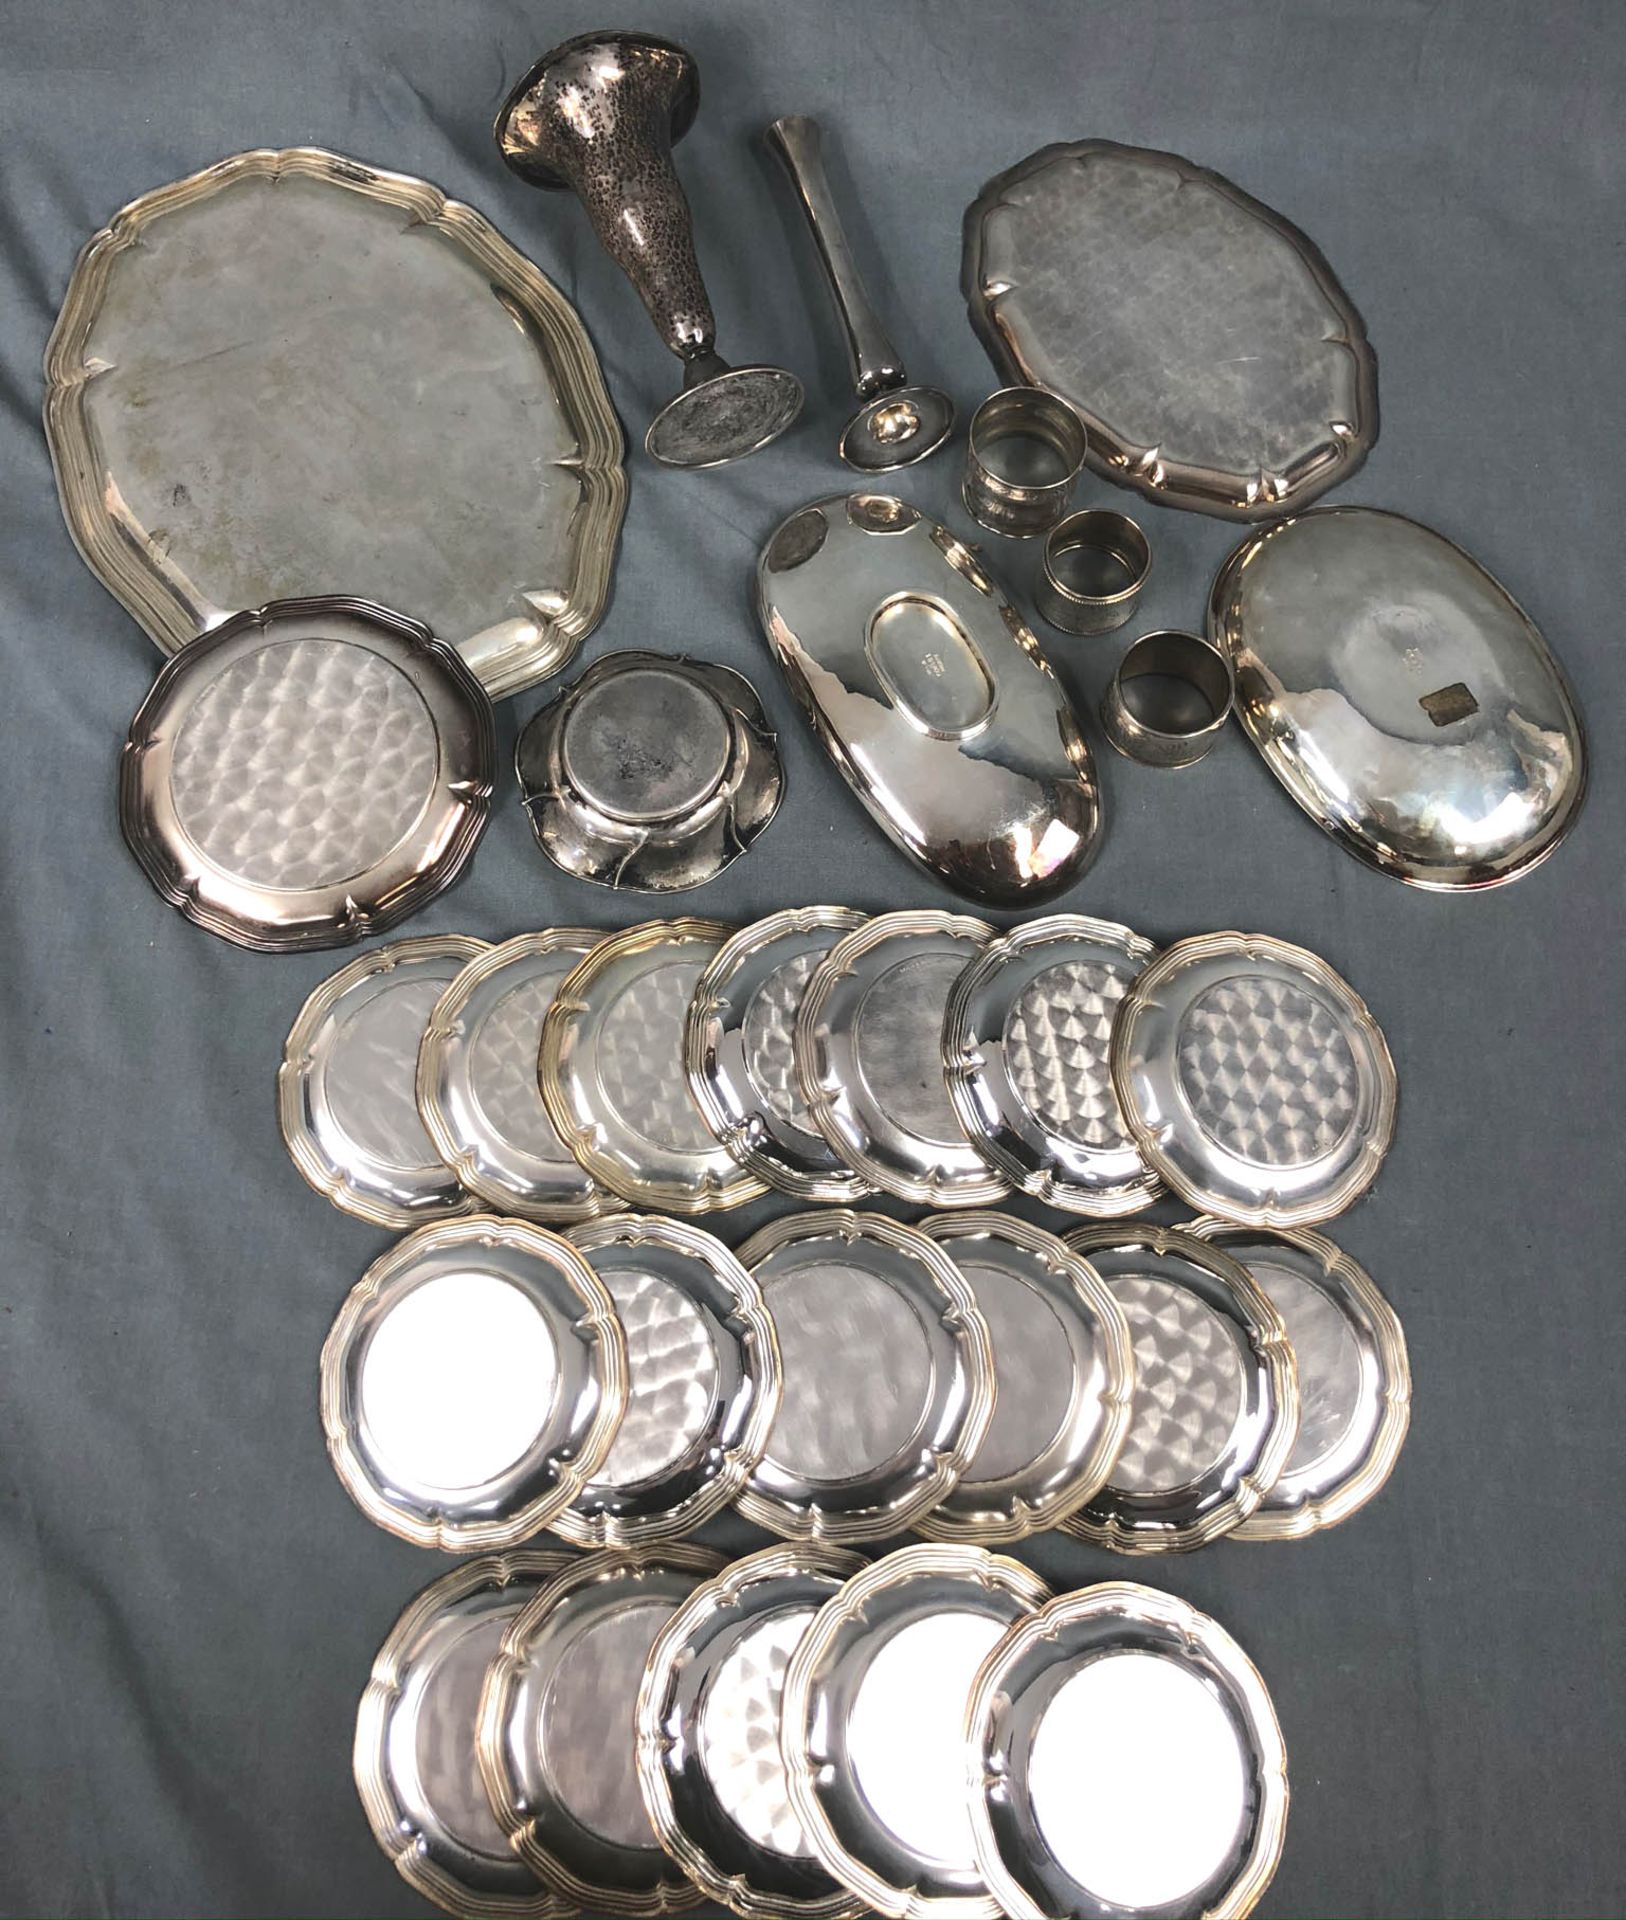 Silver. Trays, coasters, bowls, napkin rings and vases.At least 2353 grams of silver. Weighed - Image 3 of 13